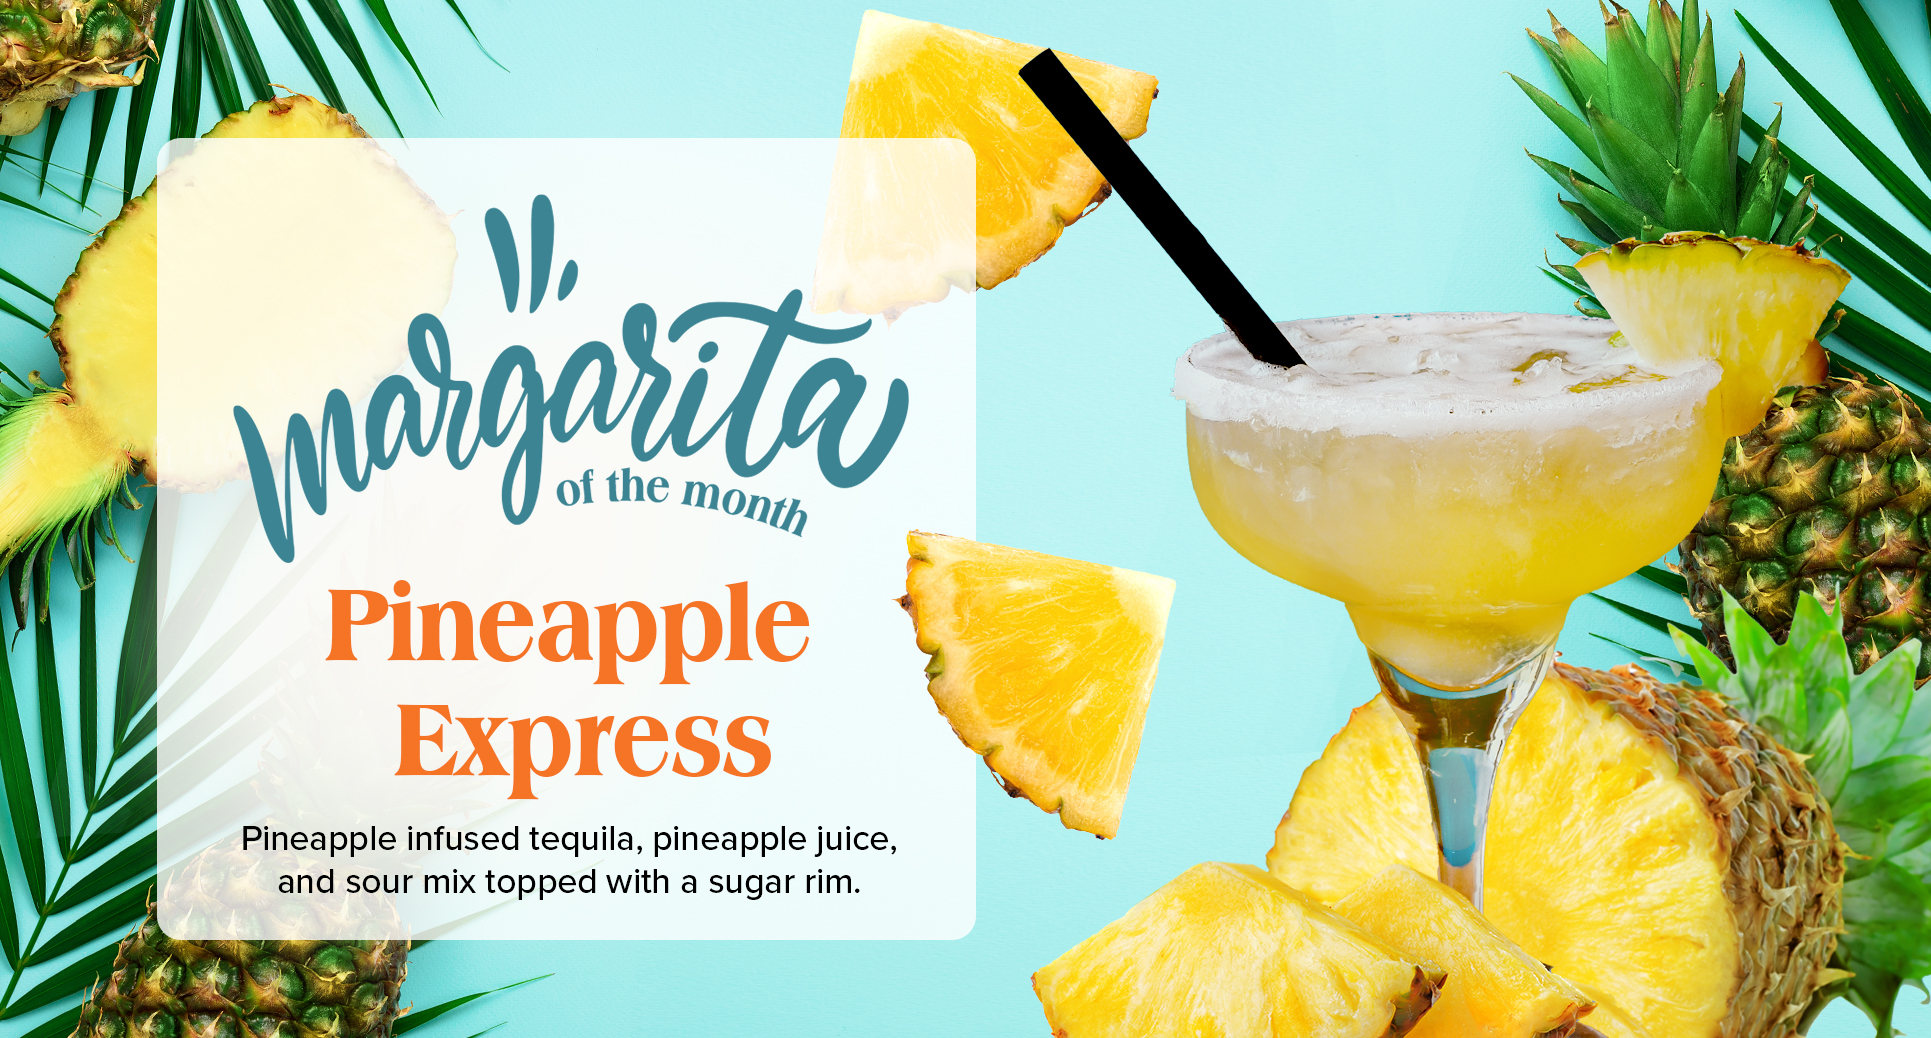 April Margarita of the Month at Que Pasa Cantina in Rapid City - Pineapple Express